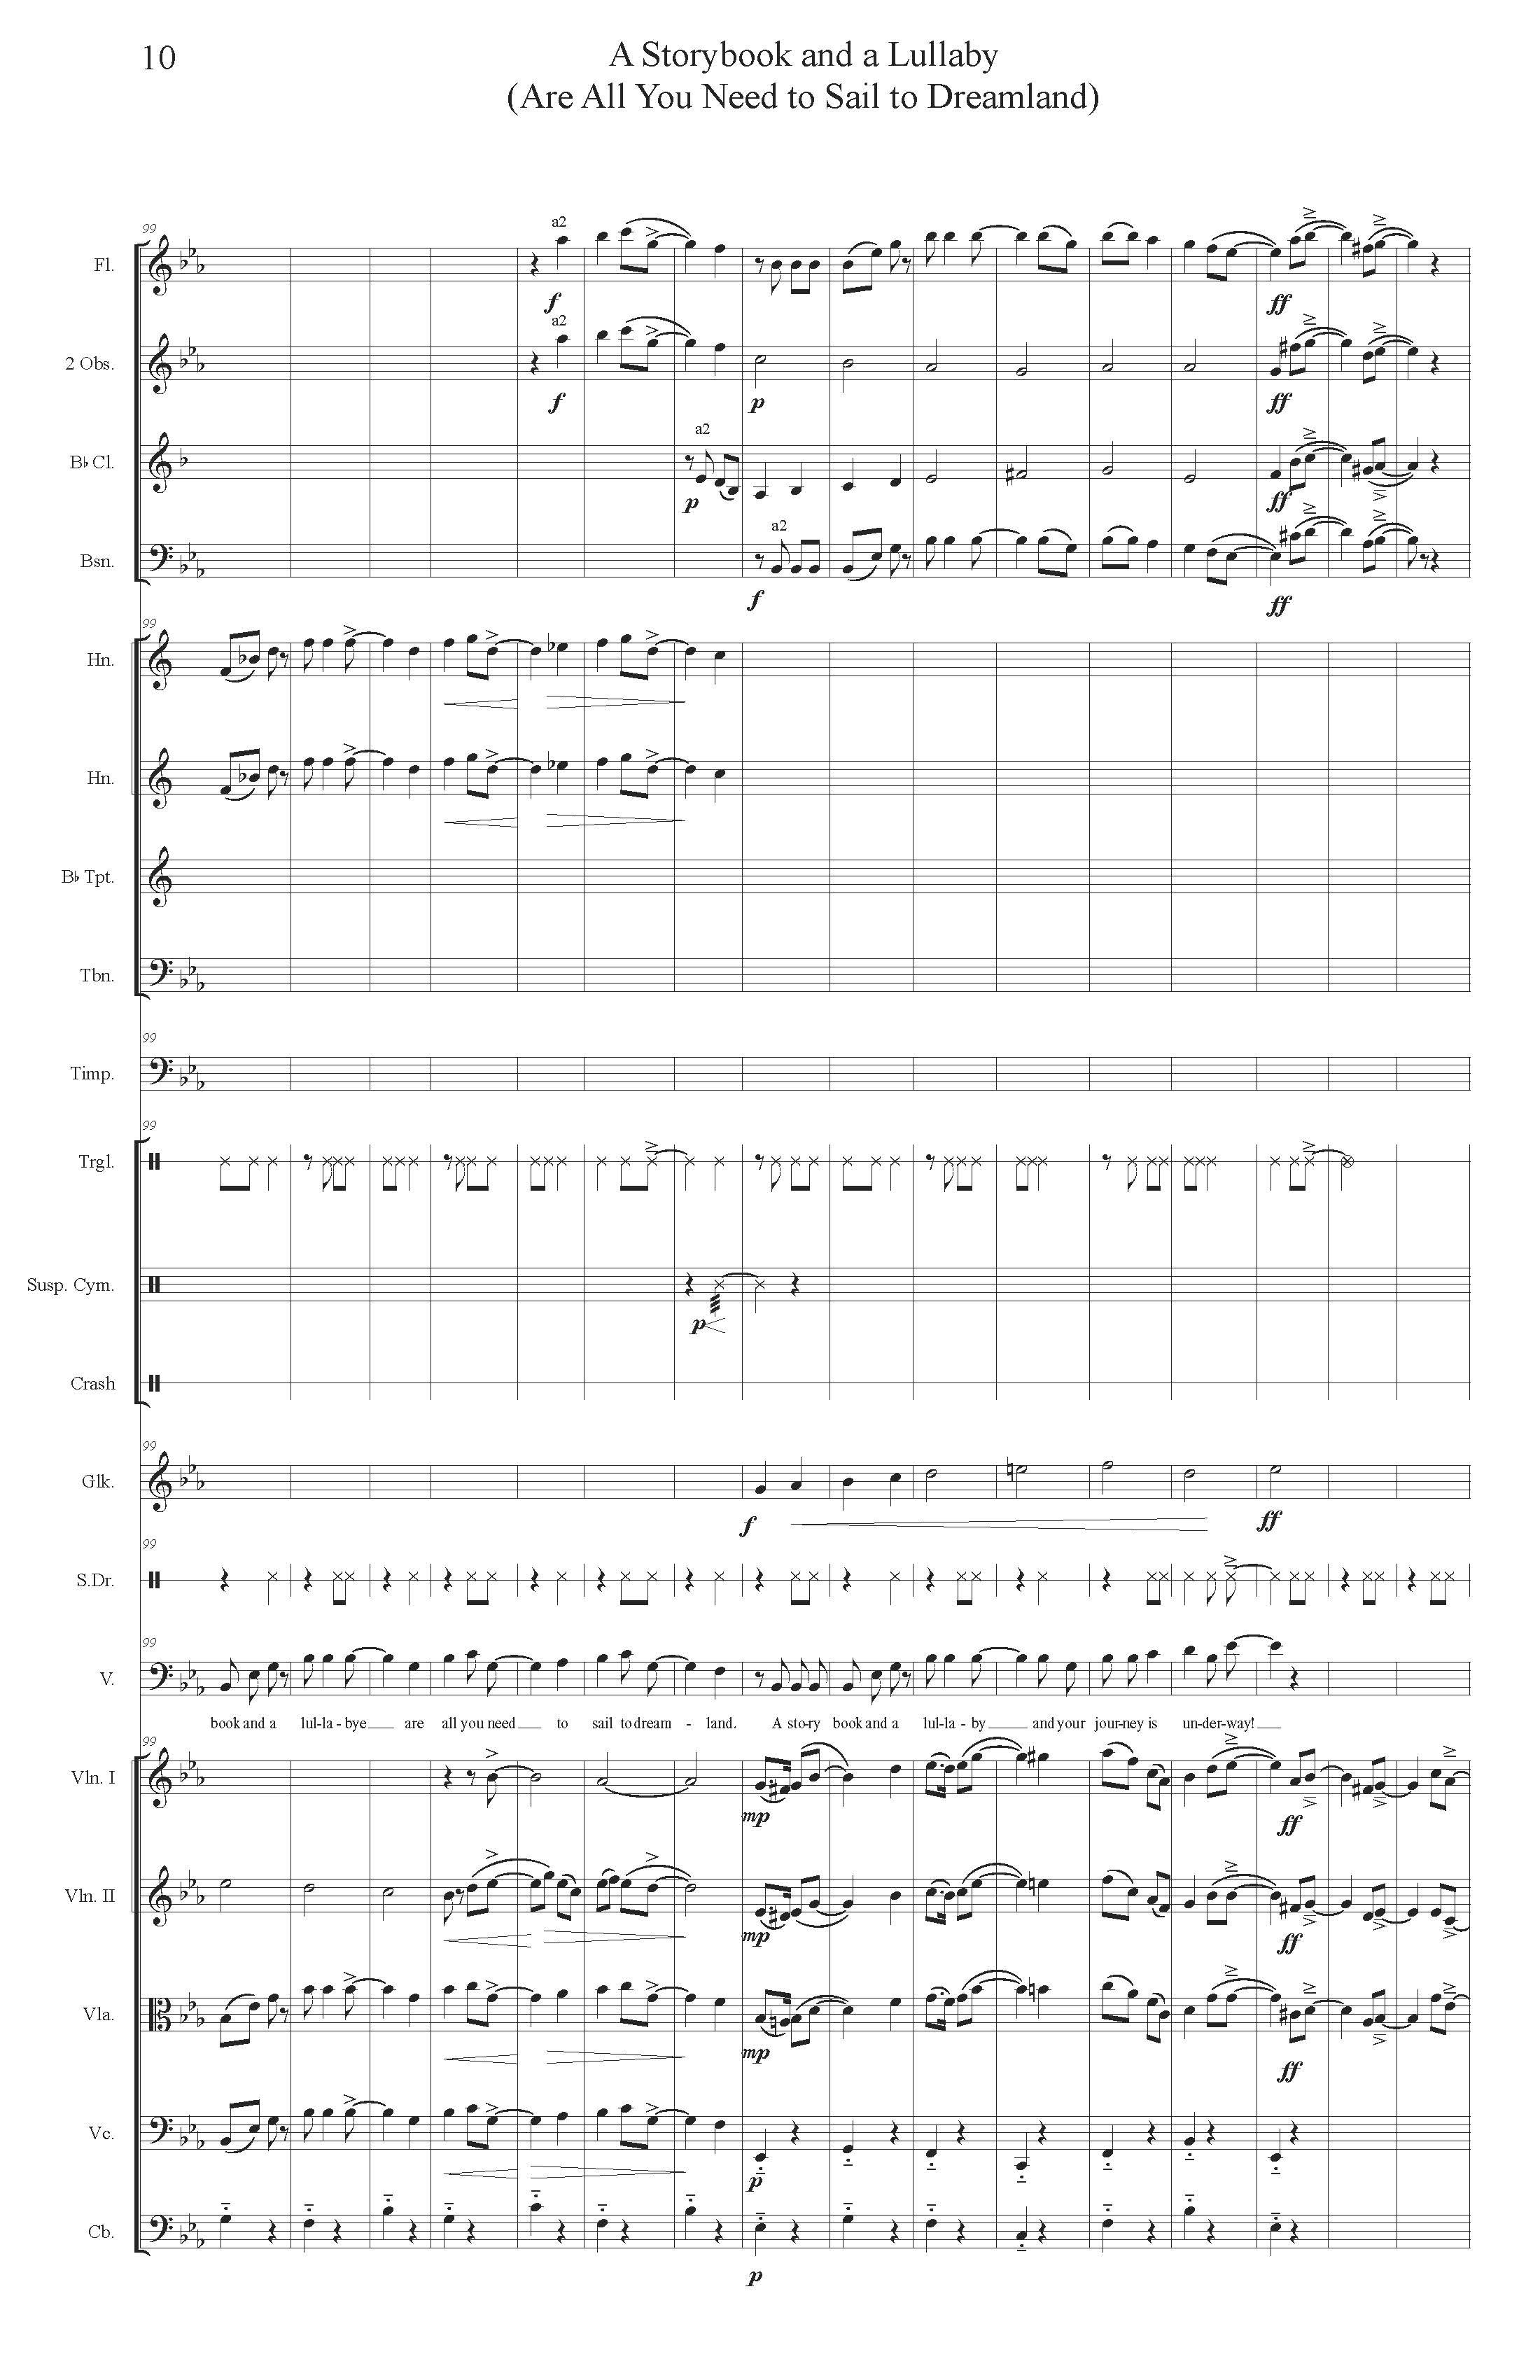 A STORYBOOK AND A LULLABY ORCH - Score_Page_10.jpg